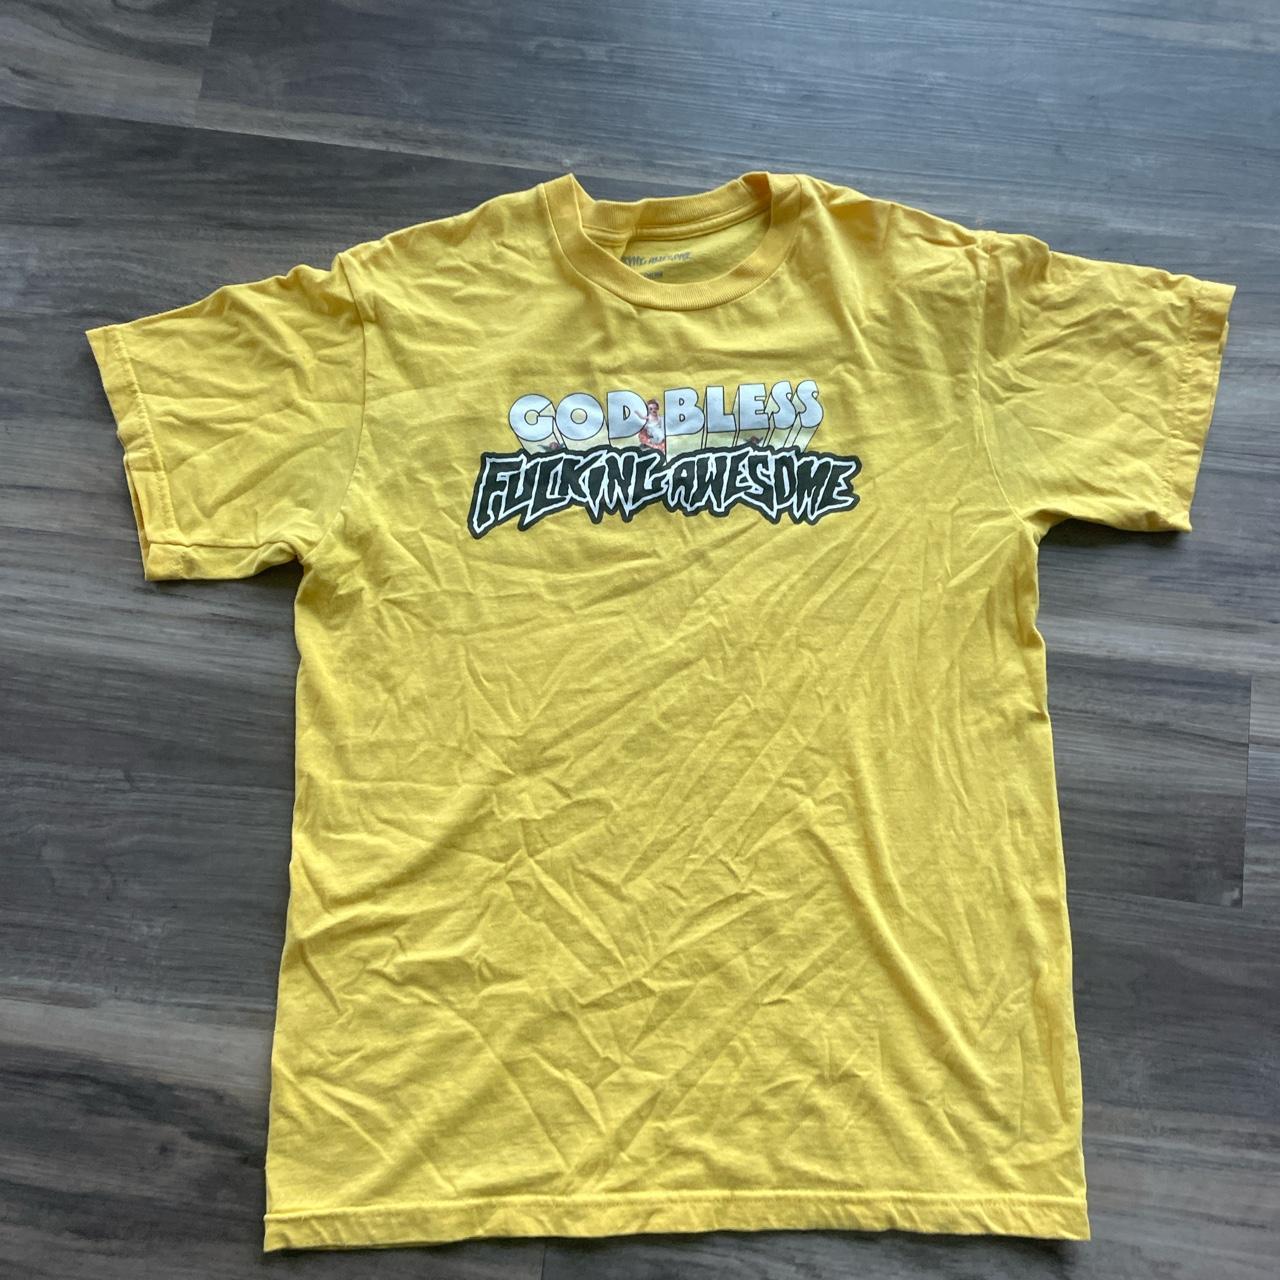 Fucking Awesome Men's Yellow and Black Shirt | Depop